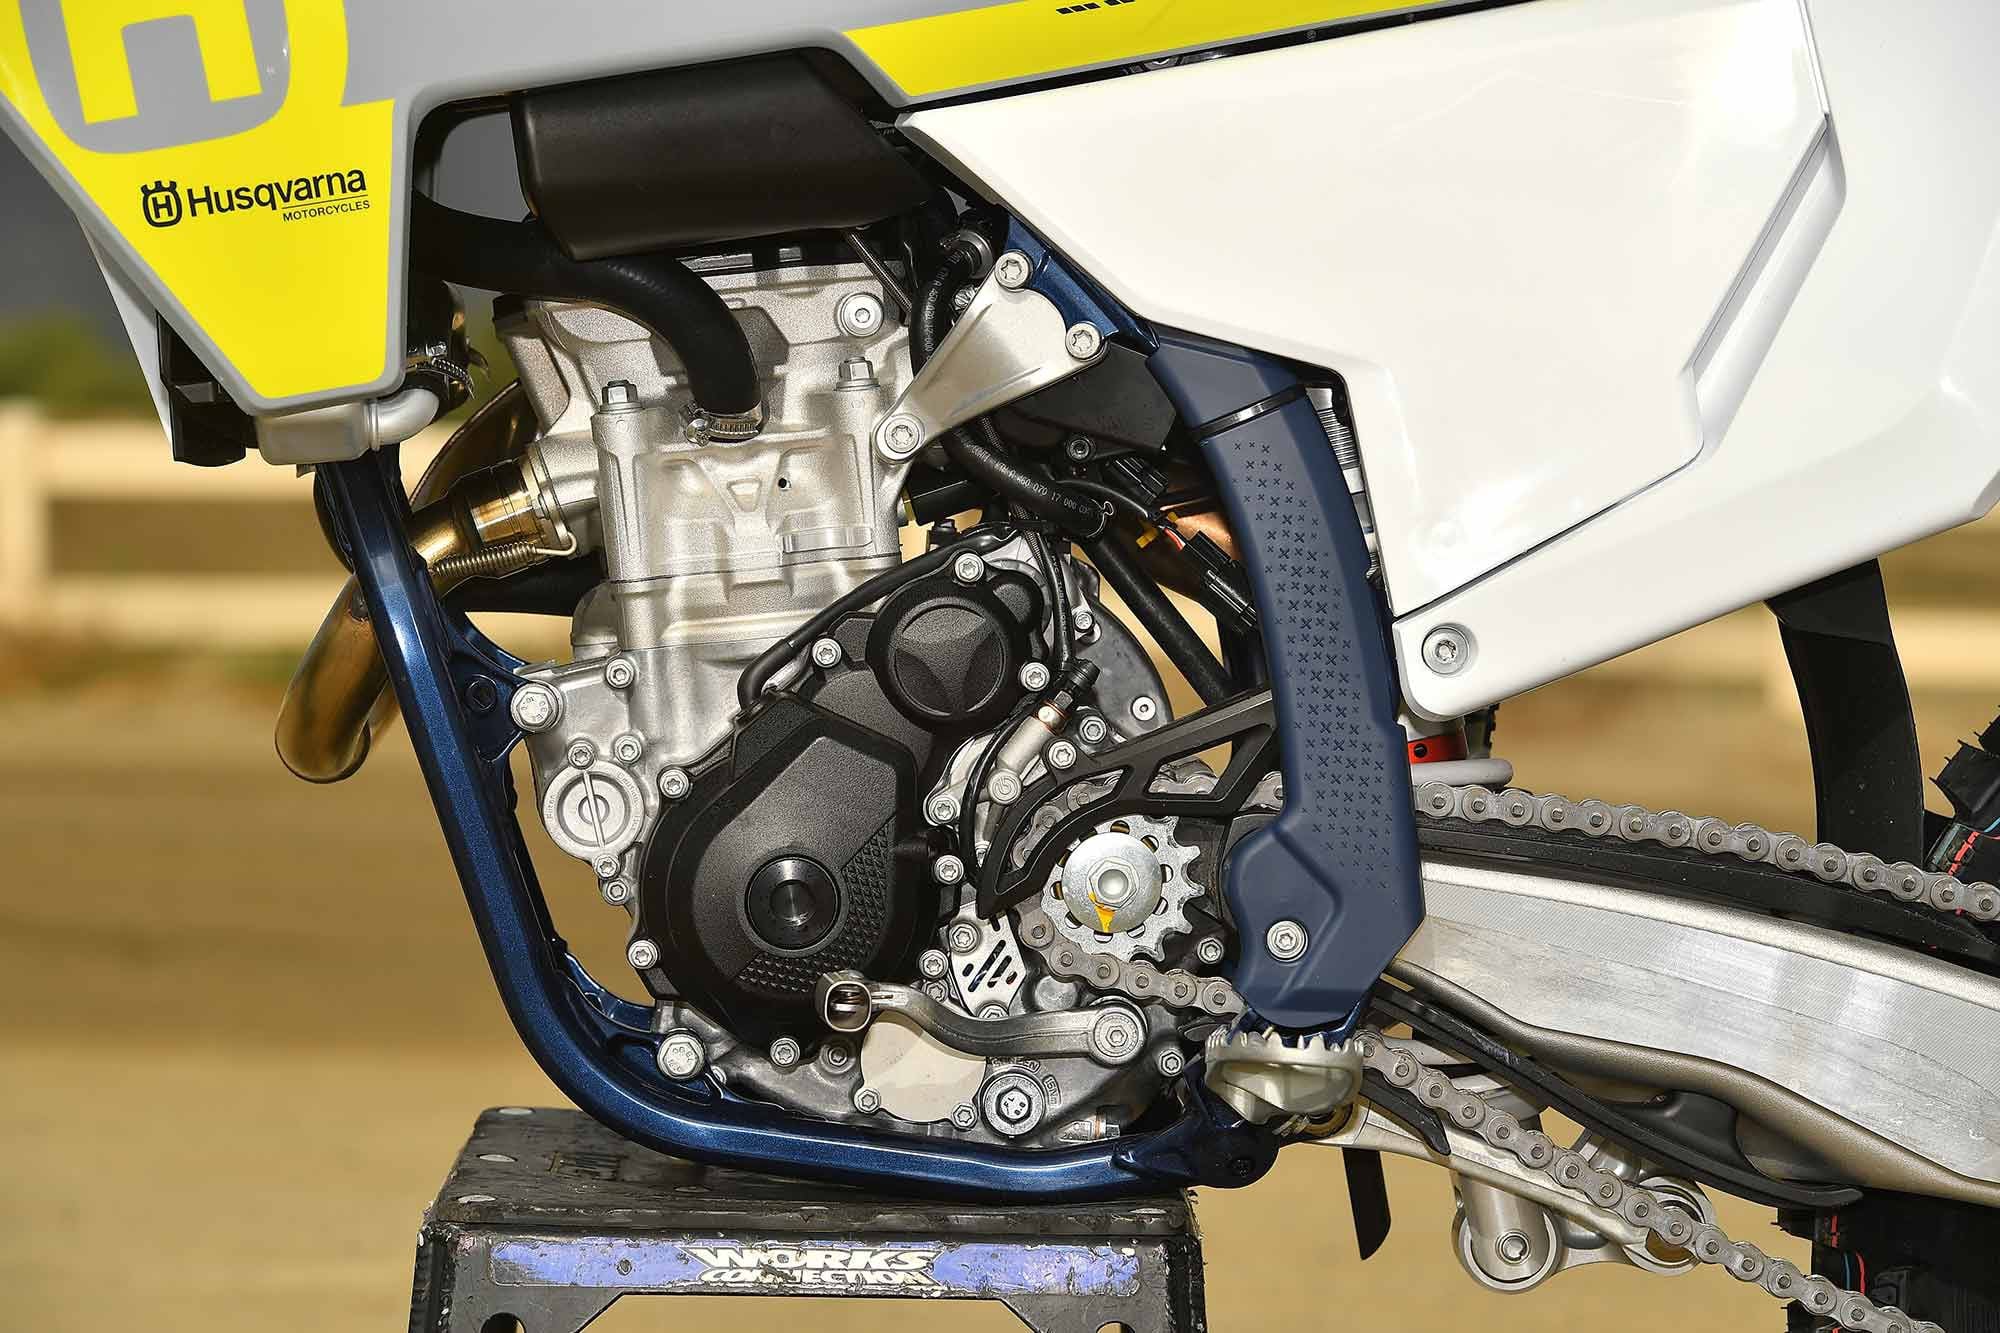 The FC 250 engine looks almost identical to the FC 350′s. The only way to tell the difference is by the quarter-liter powerplant’s shorter cylinder.